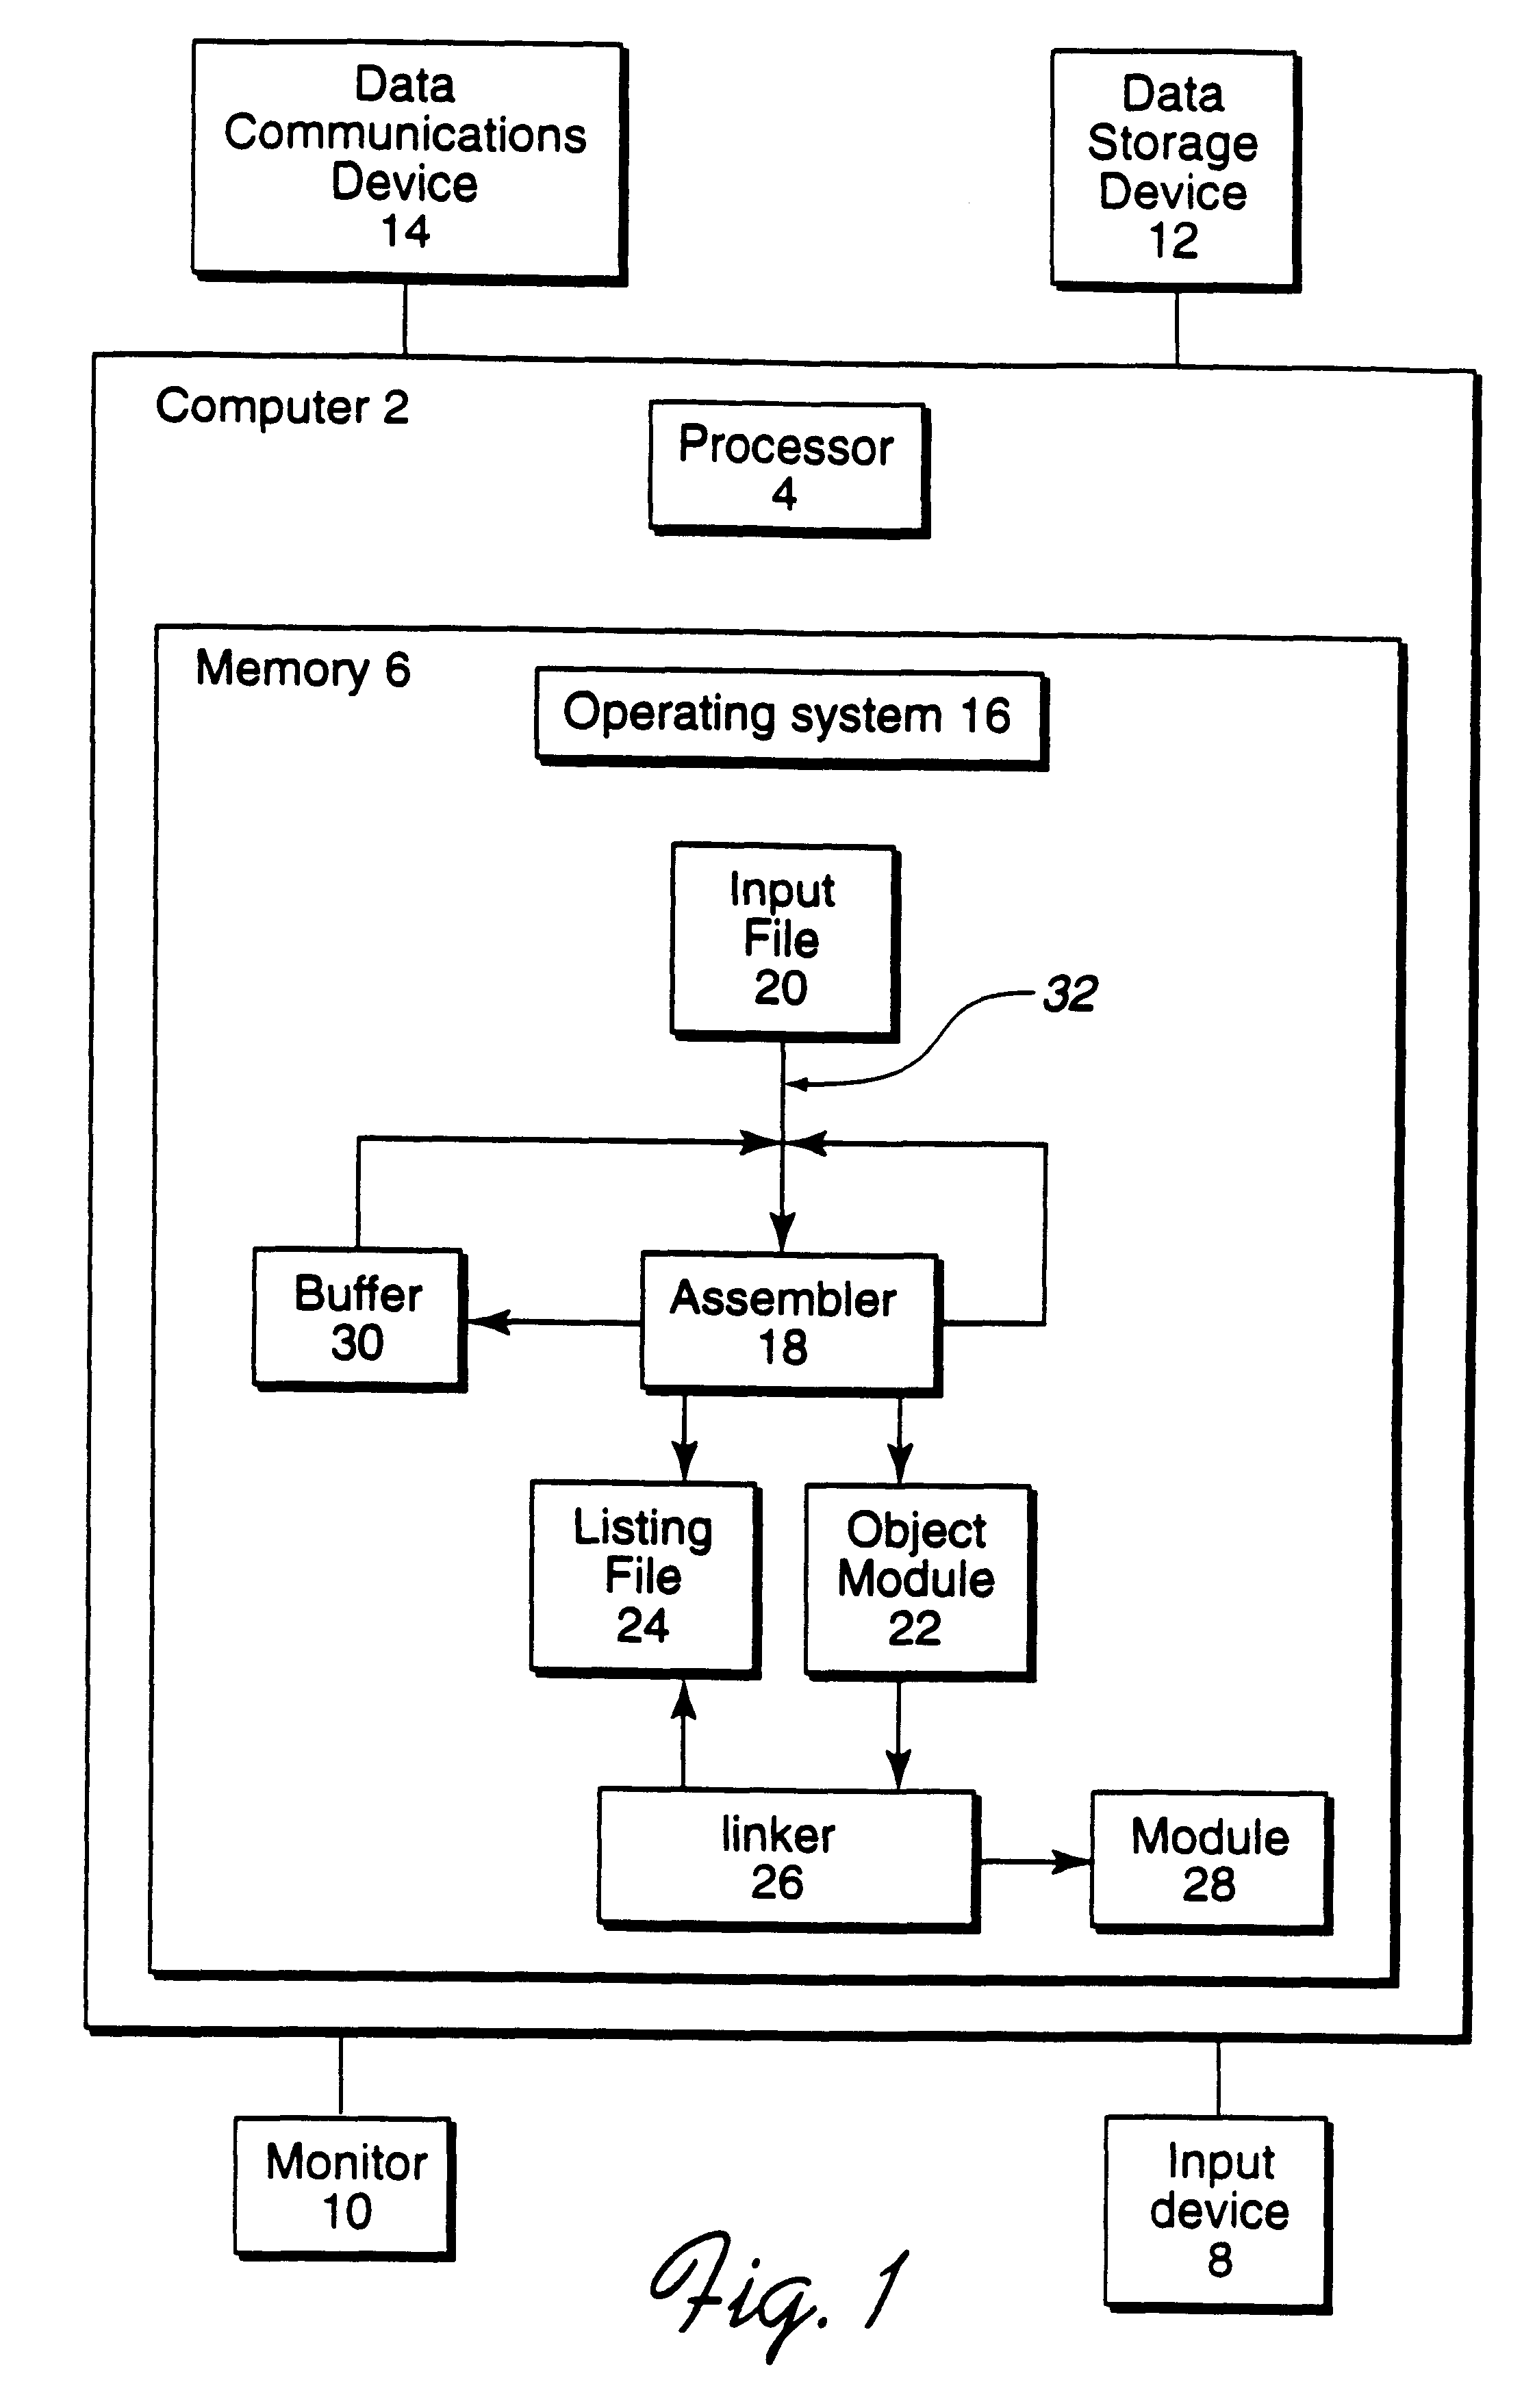 Method and system for controlling the generation of program statements